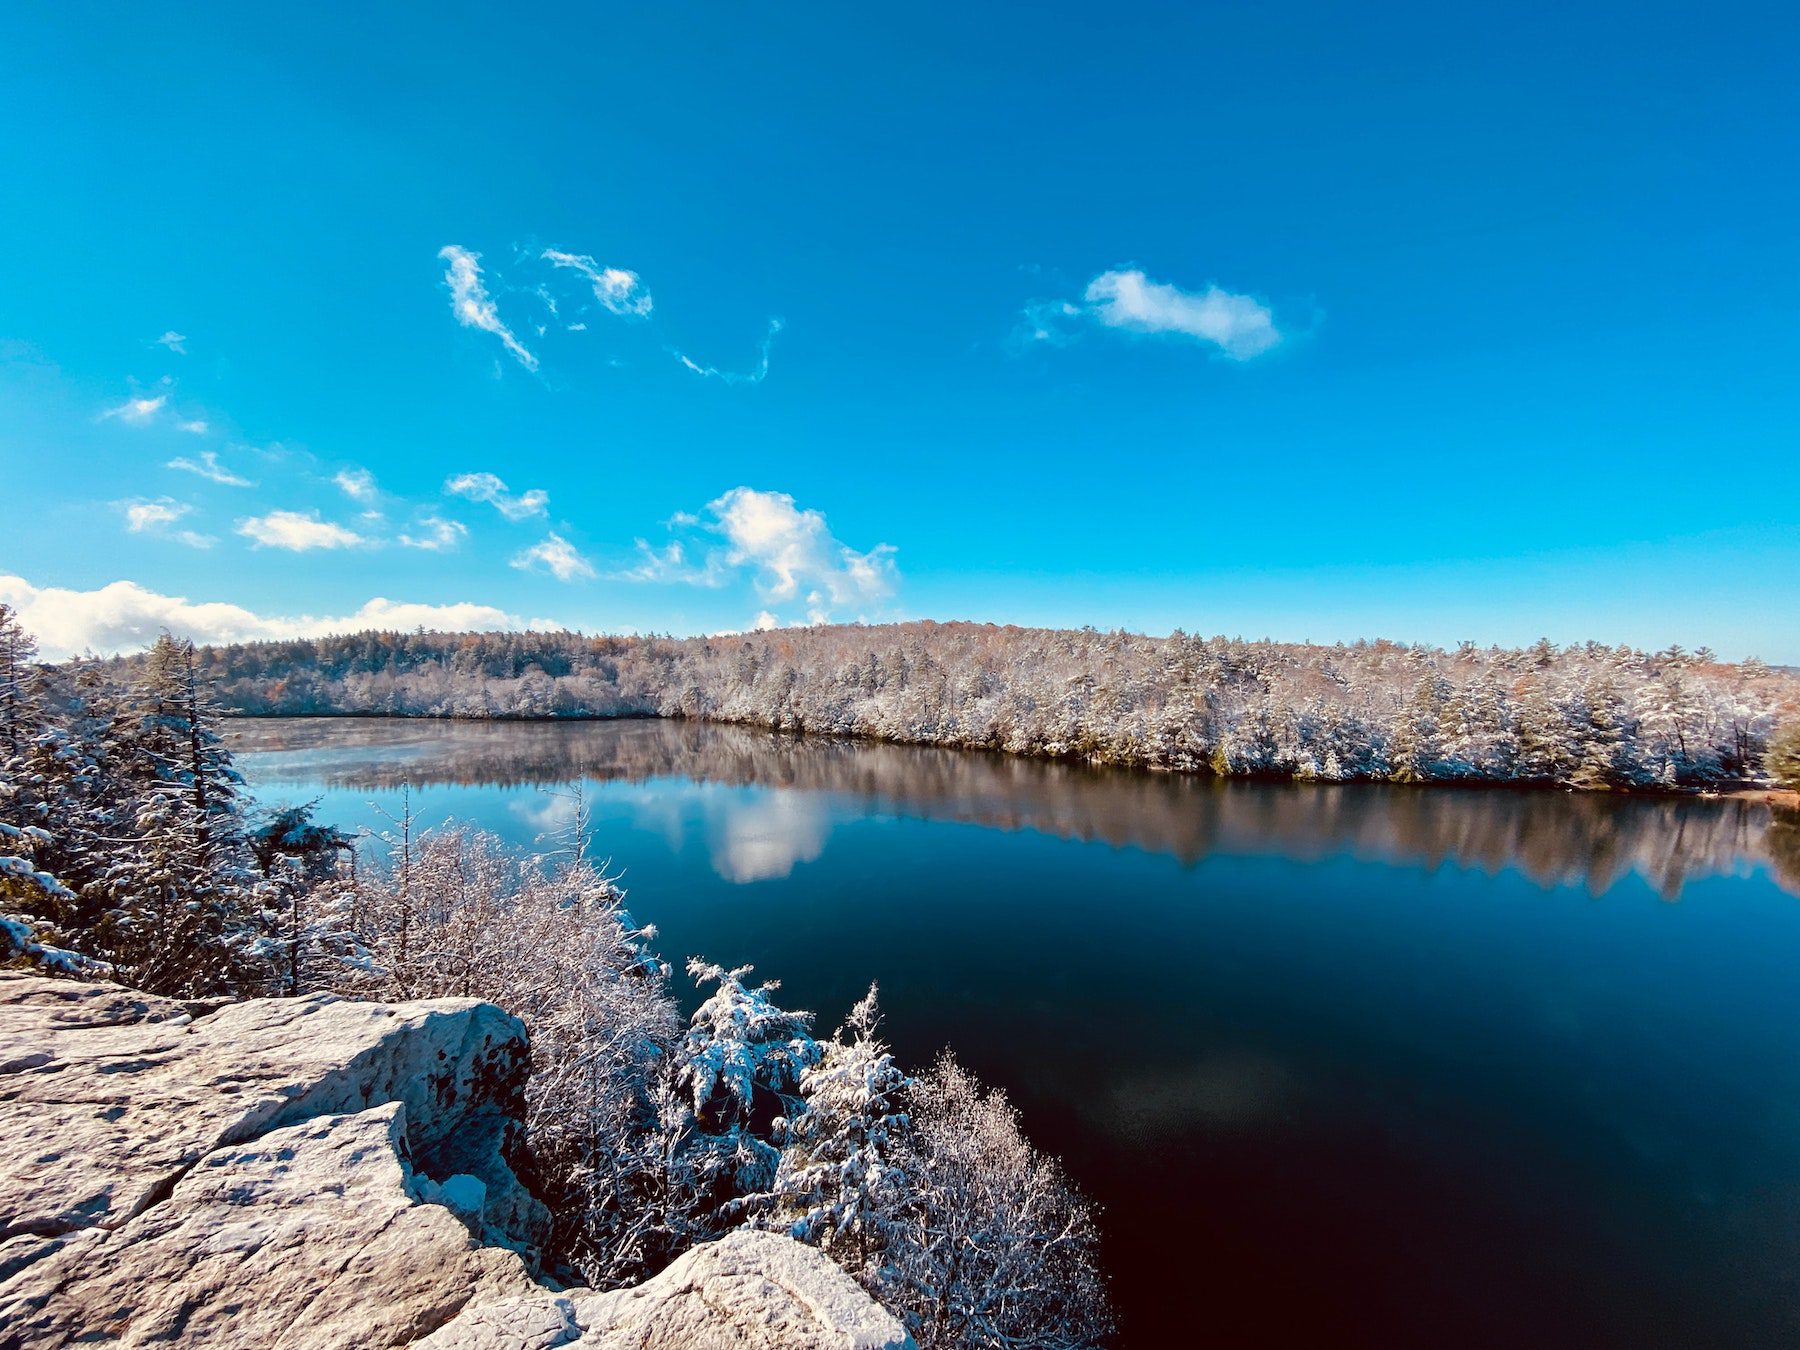 Minnewaska State Park Preserve with a large lake surrounded by snow-flocked trees with a mostly cloudless sky